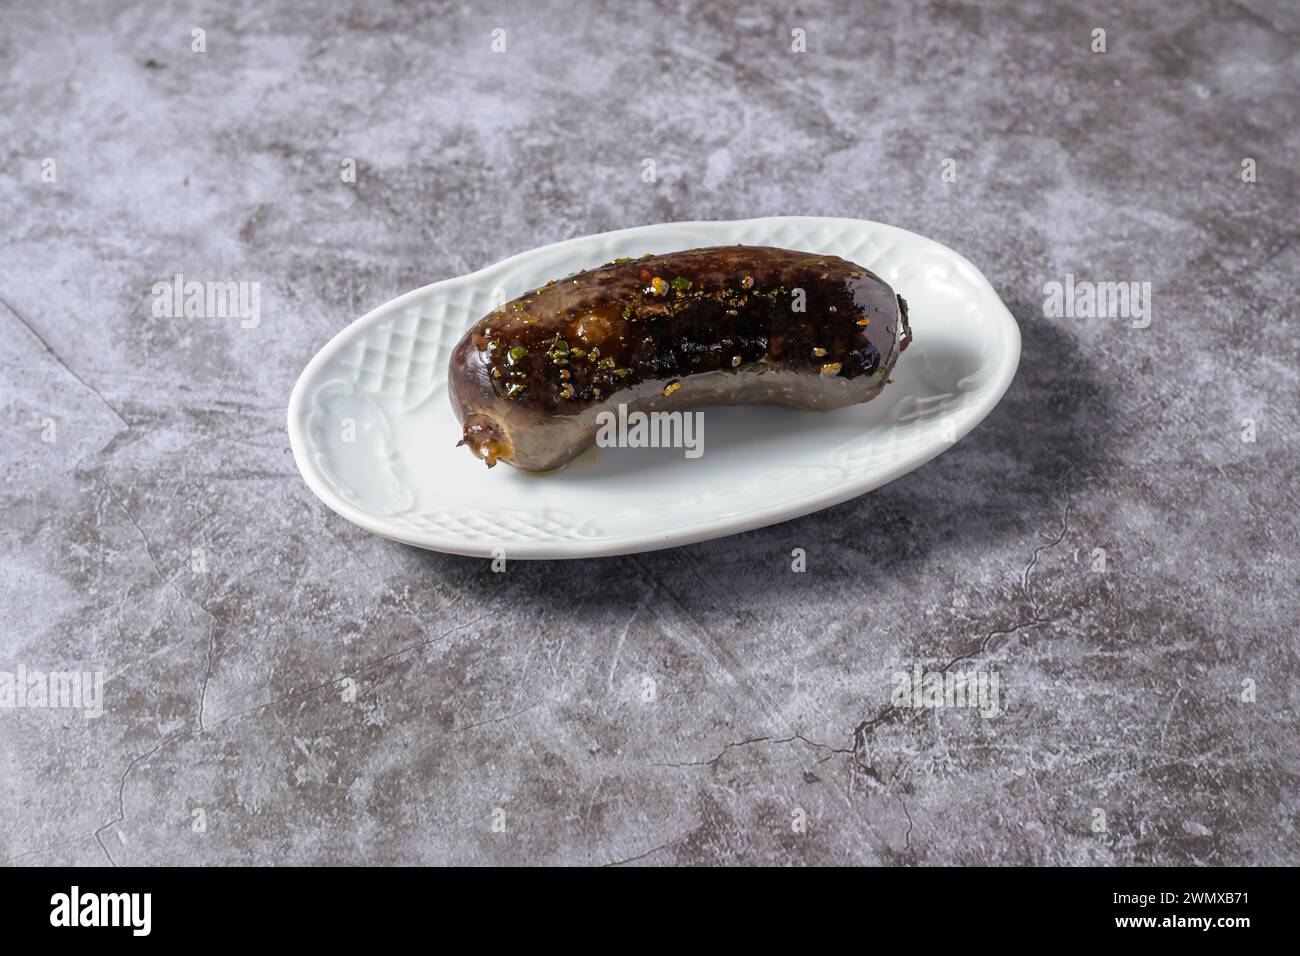 Typical argentinian blood sausage, grilled Stock Photo